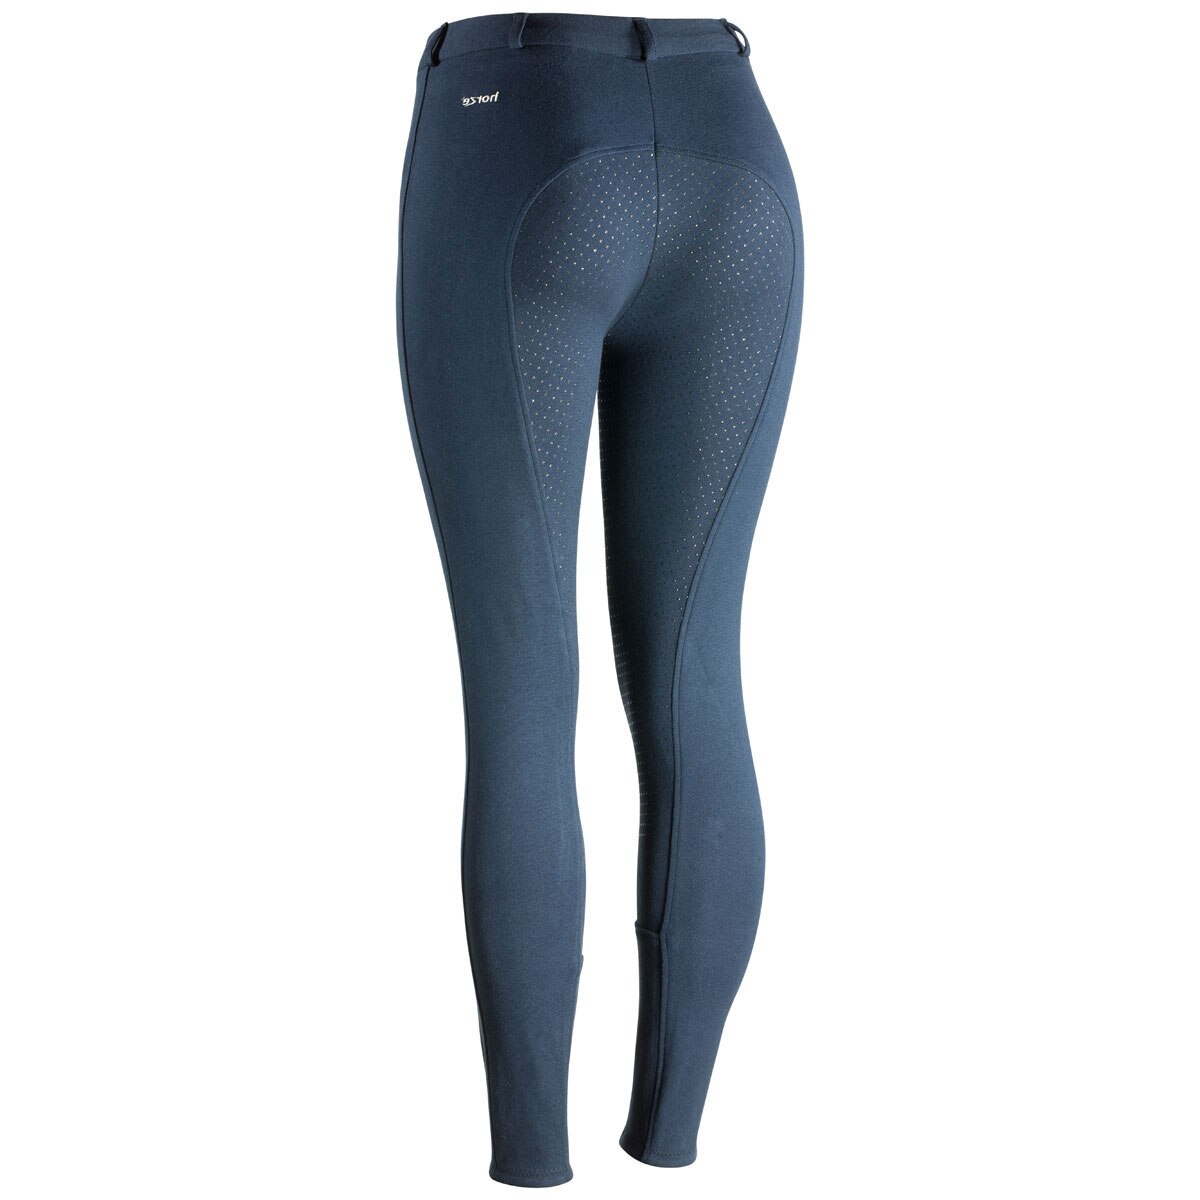 Horze Bianca Women's Silicone Full Seat Riding Tights All Season Strong Grip